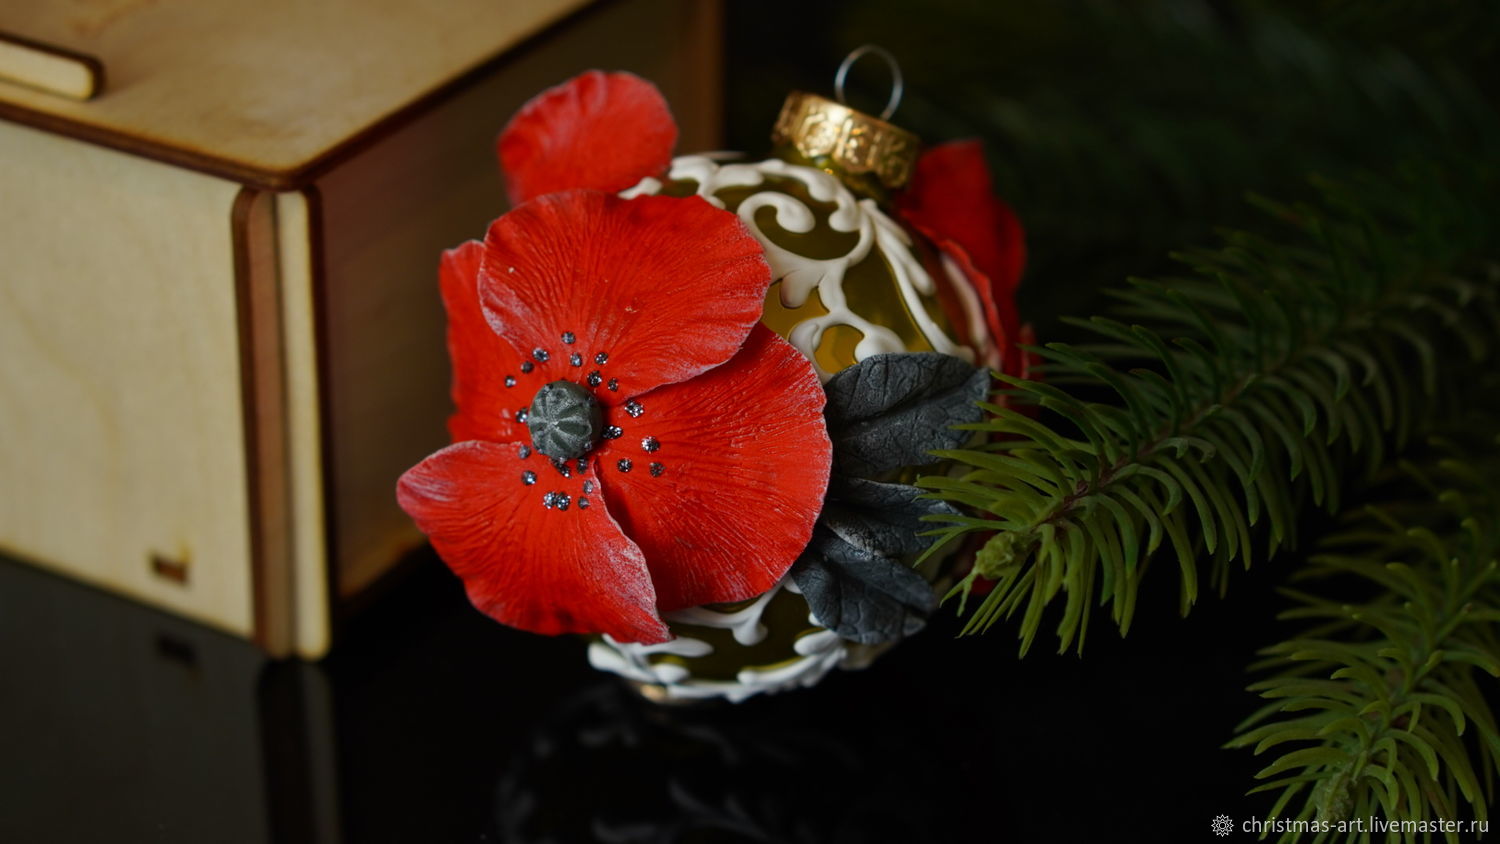 Christmas toy glass Christmas ball flower poppy, Christmas decorations, Moscow,  Фото №1